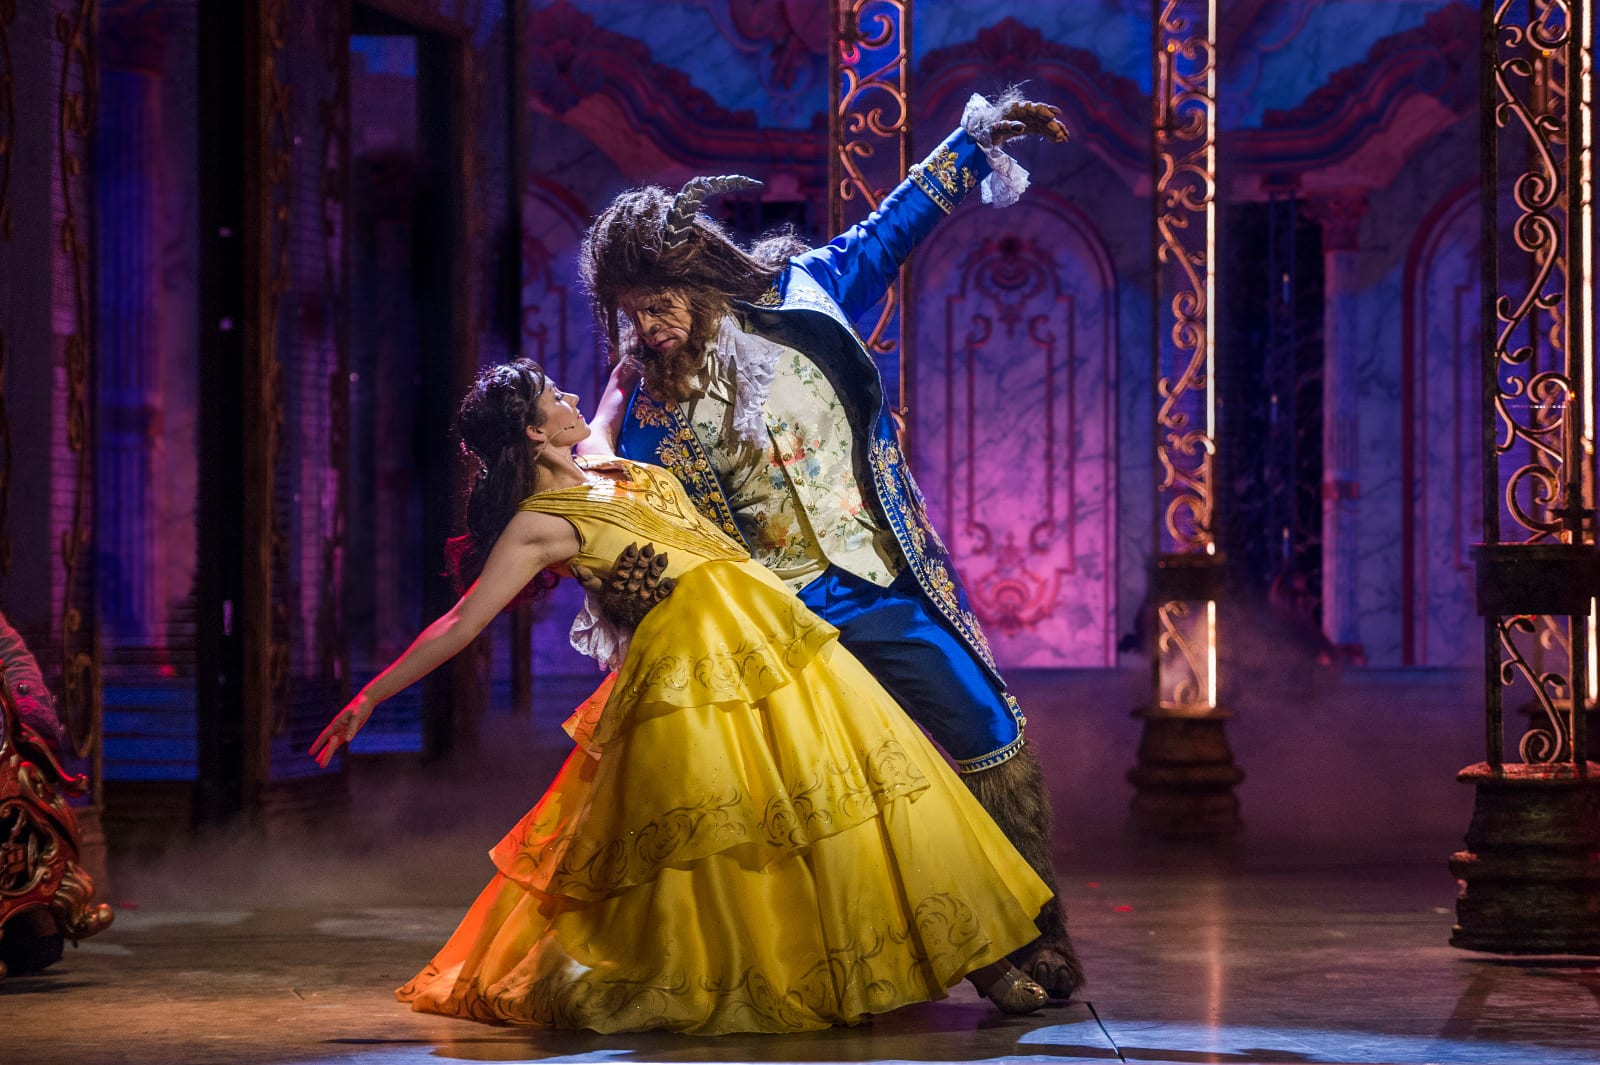 This 24-Question All-Rounded “True or False” Quiz Will Determine If You Know Enough Beauty and the Beast Musical waltz